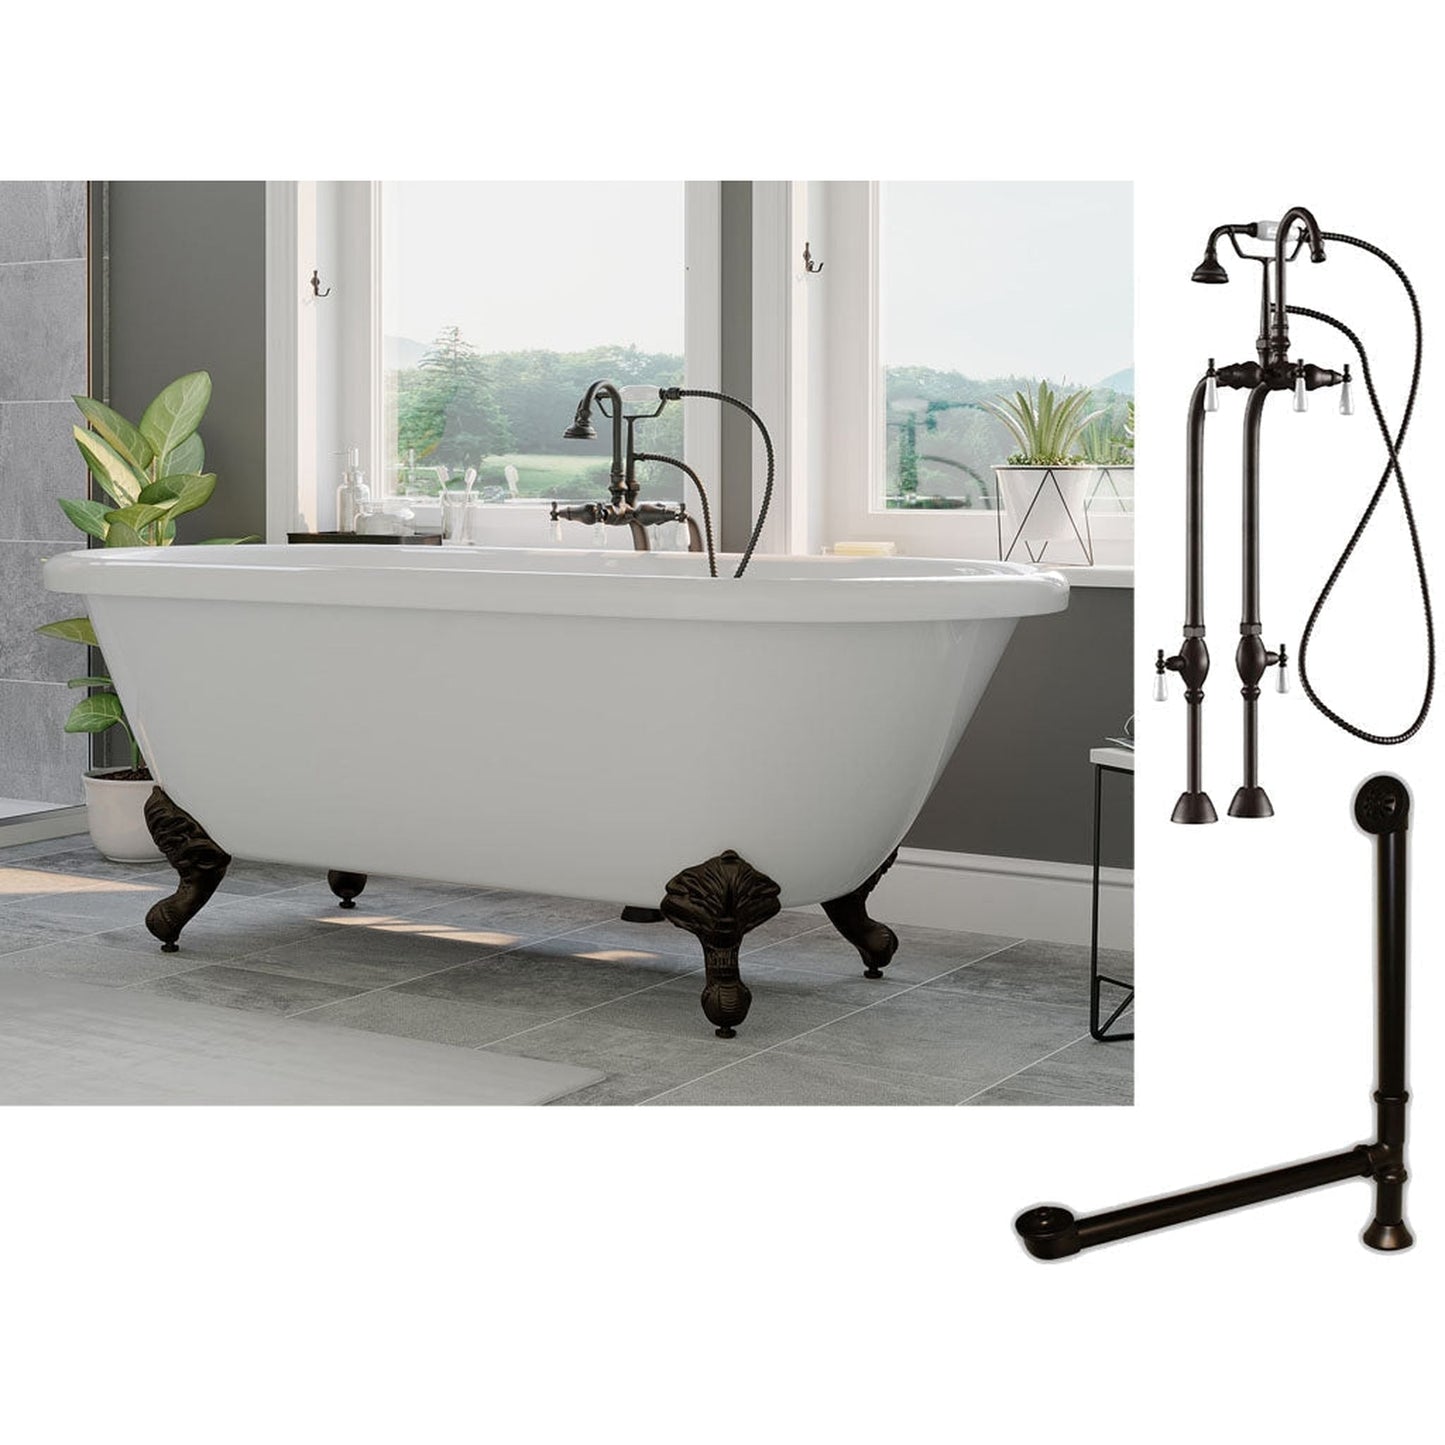 Cambridge Plumbing 70" White Acrylic Double Ended Clawfoot Bathtub With No Deck Holes And Complete Plumbing Package Including Freestanding English Telephone Gooseneck Faucet, Drain And Overflow Assembly In Polished Chrome